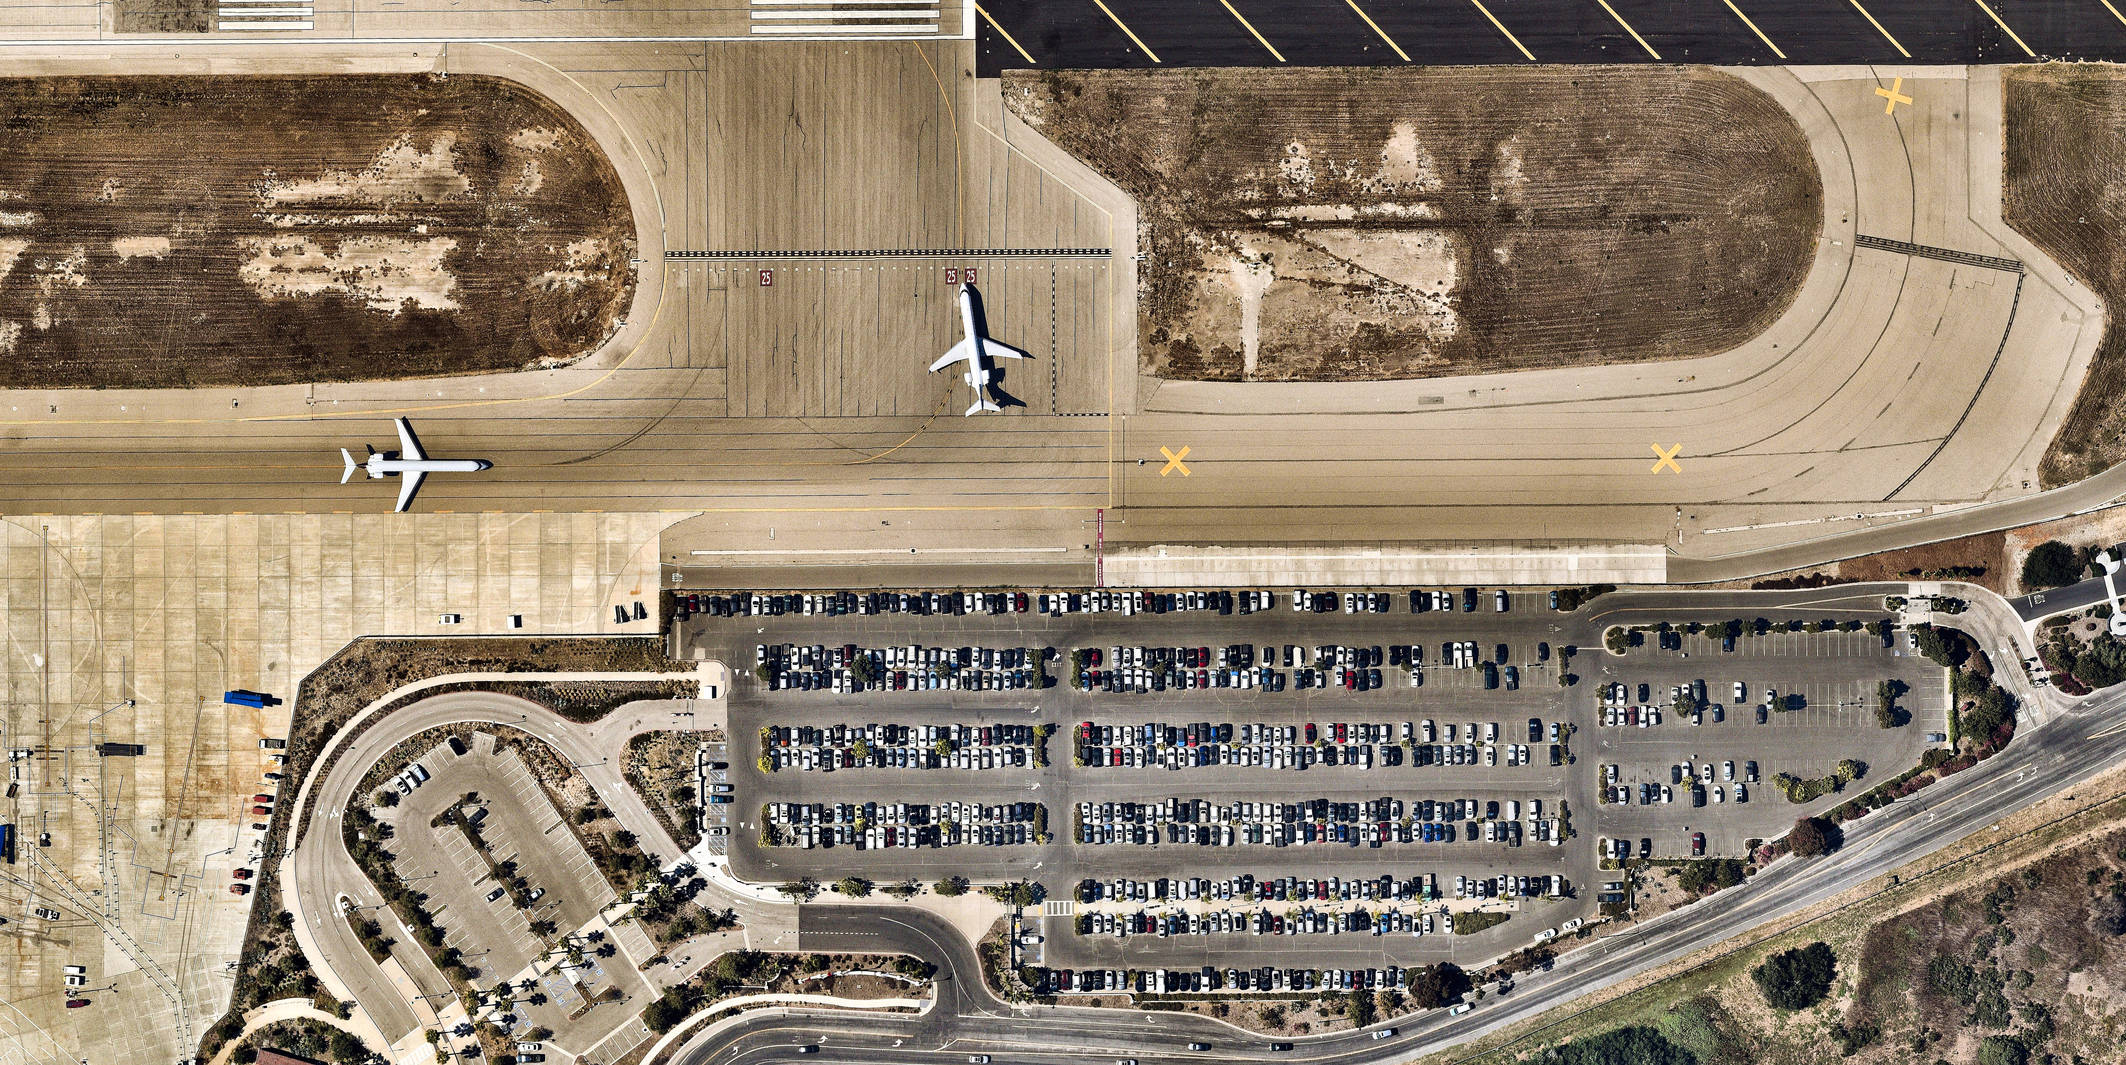 Aerial view, California, carpark, City, Cityscape, geometry shapes, Los Angeles, Outdoors, Overhead View, Photography, road, Santa Barbara, USA, aircraft, airport, runway, airplanes